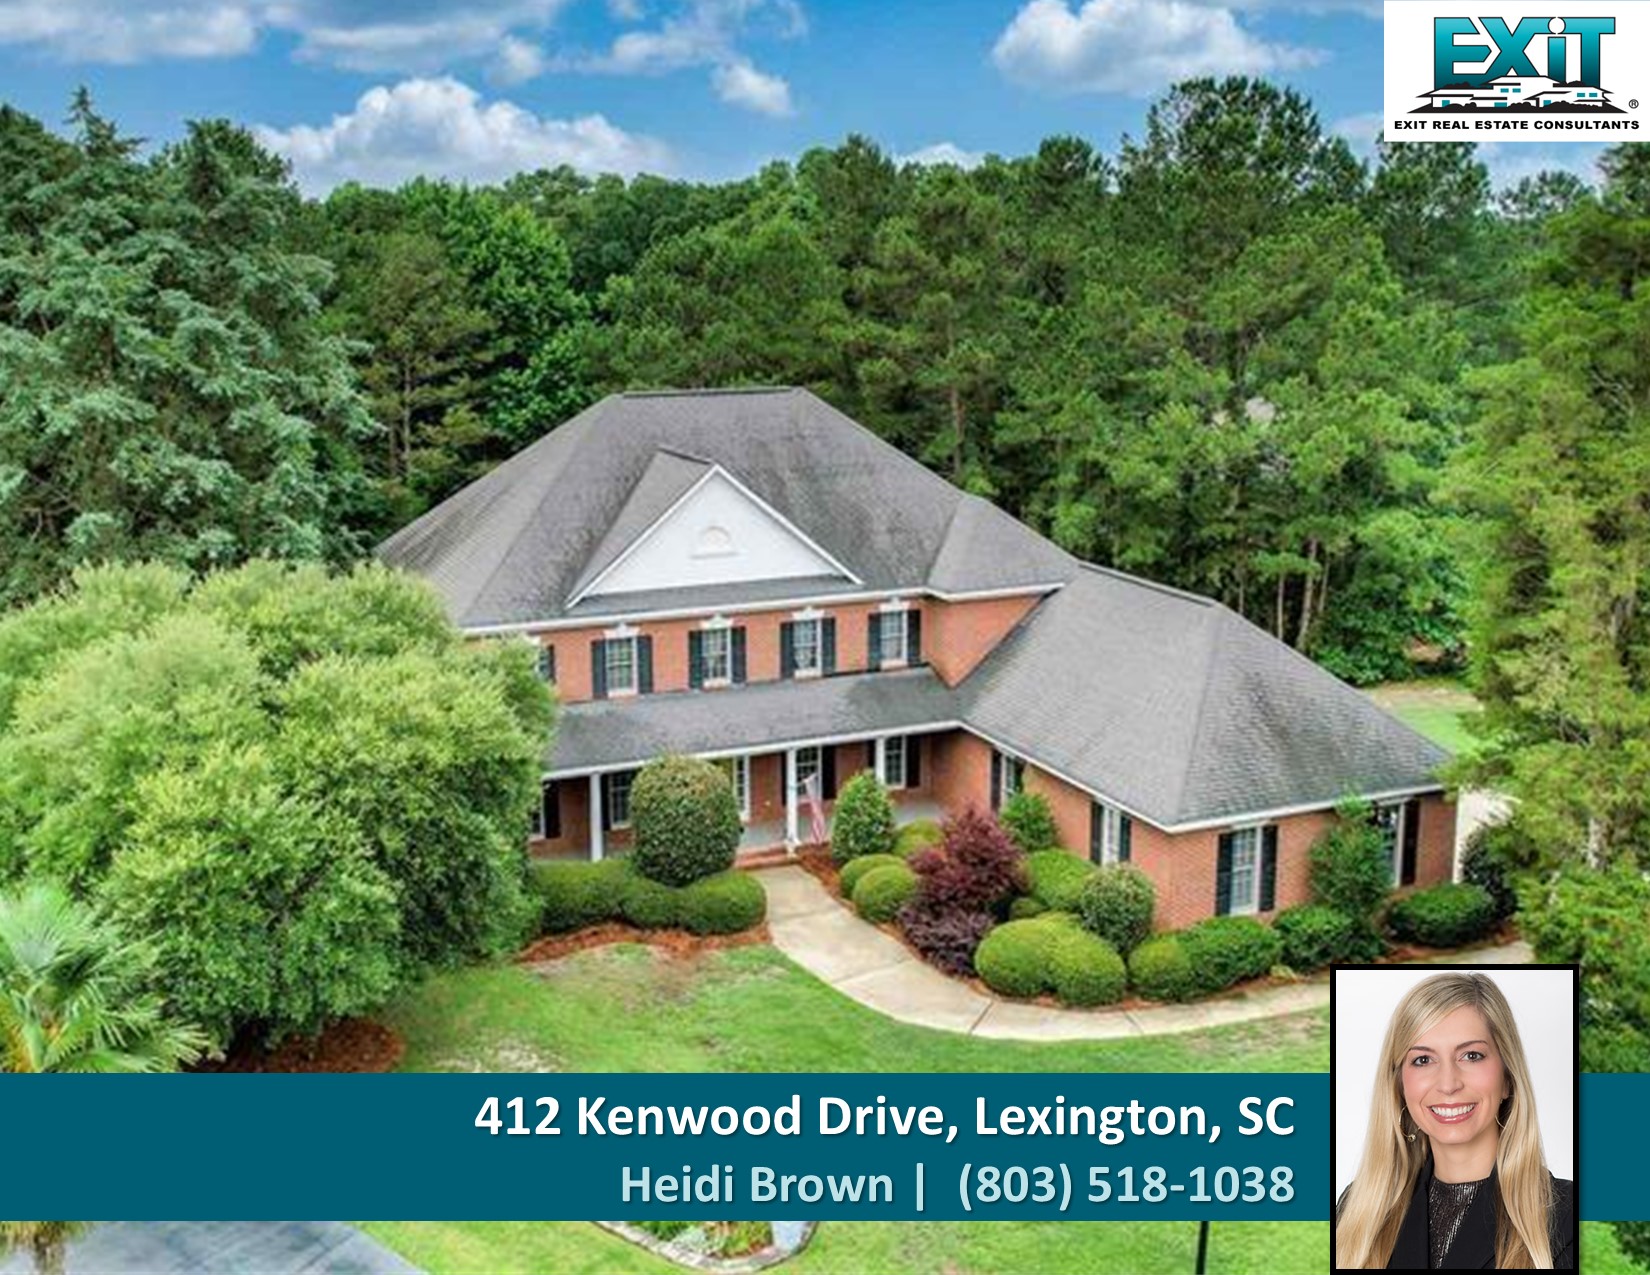 Just listed in Kenwood